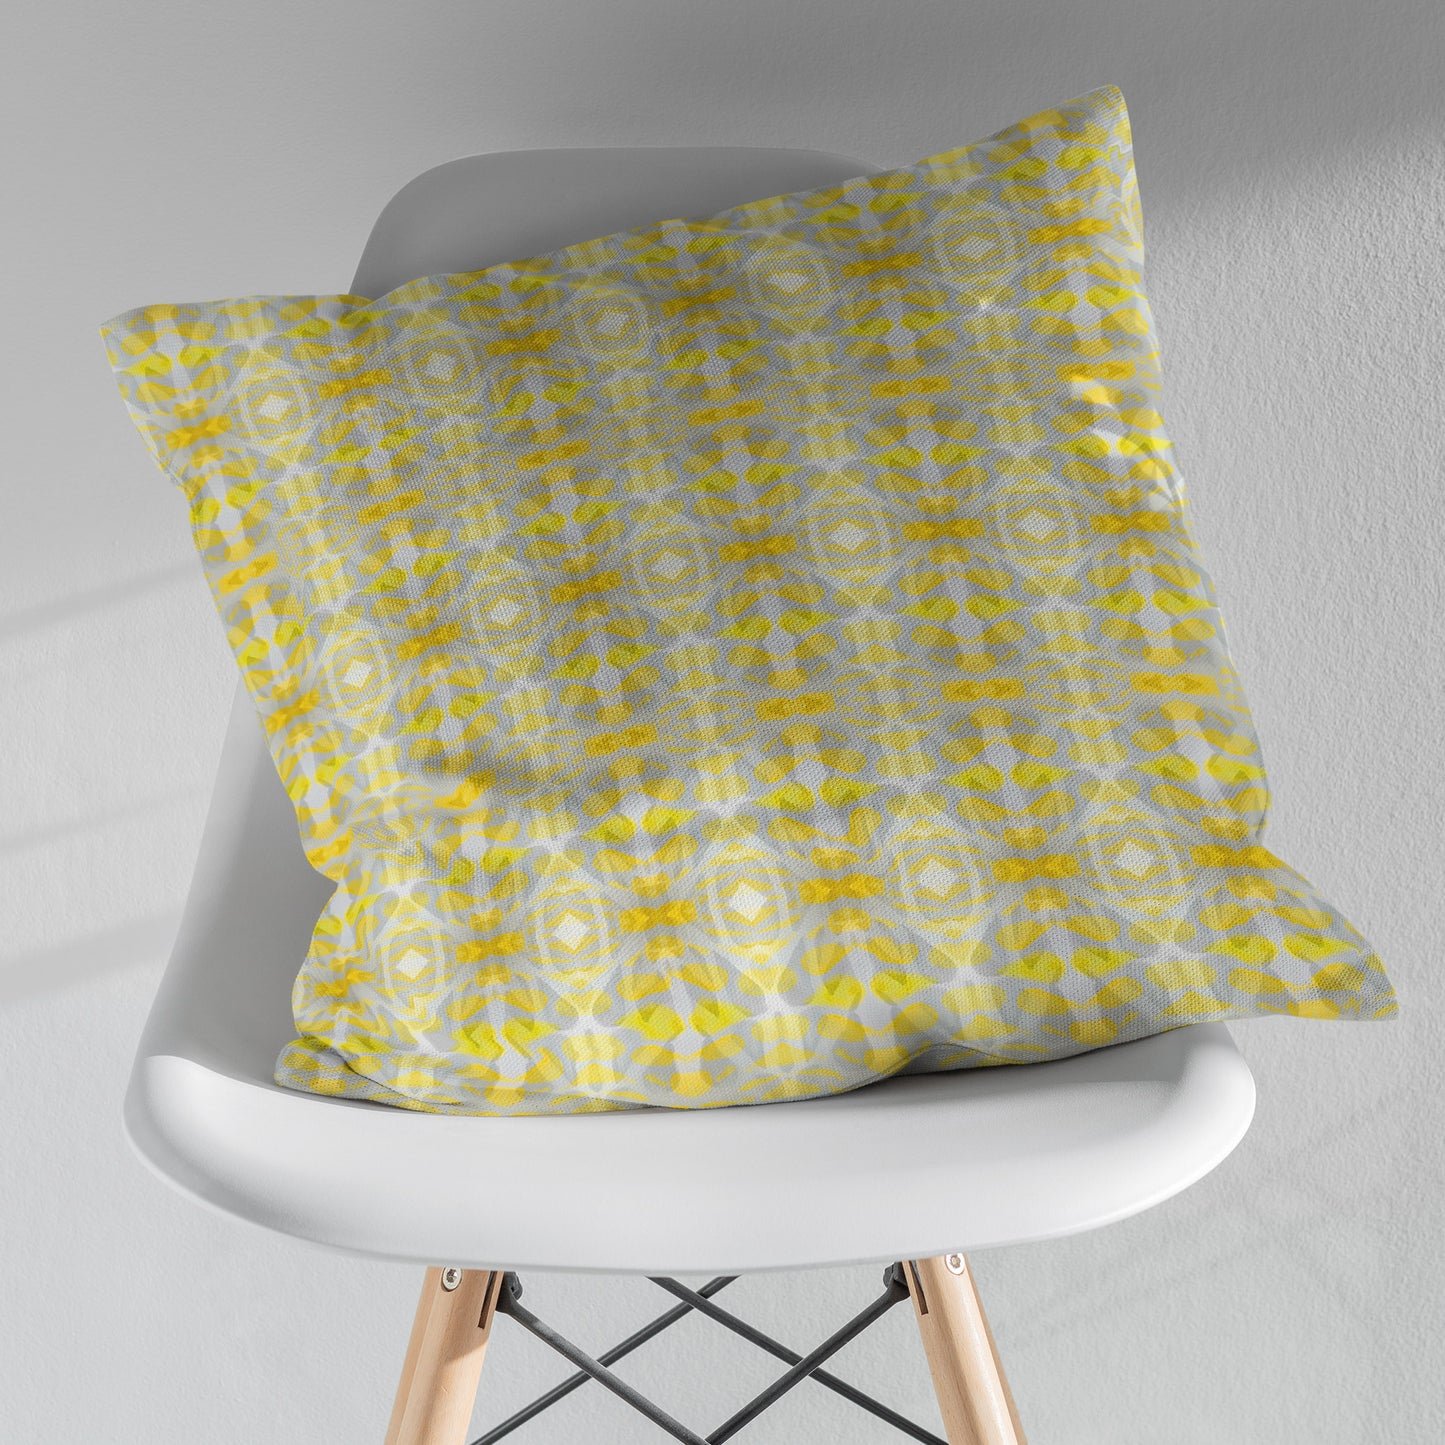 Yellow patterned pillow sitting on a white modernist chair